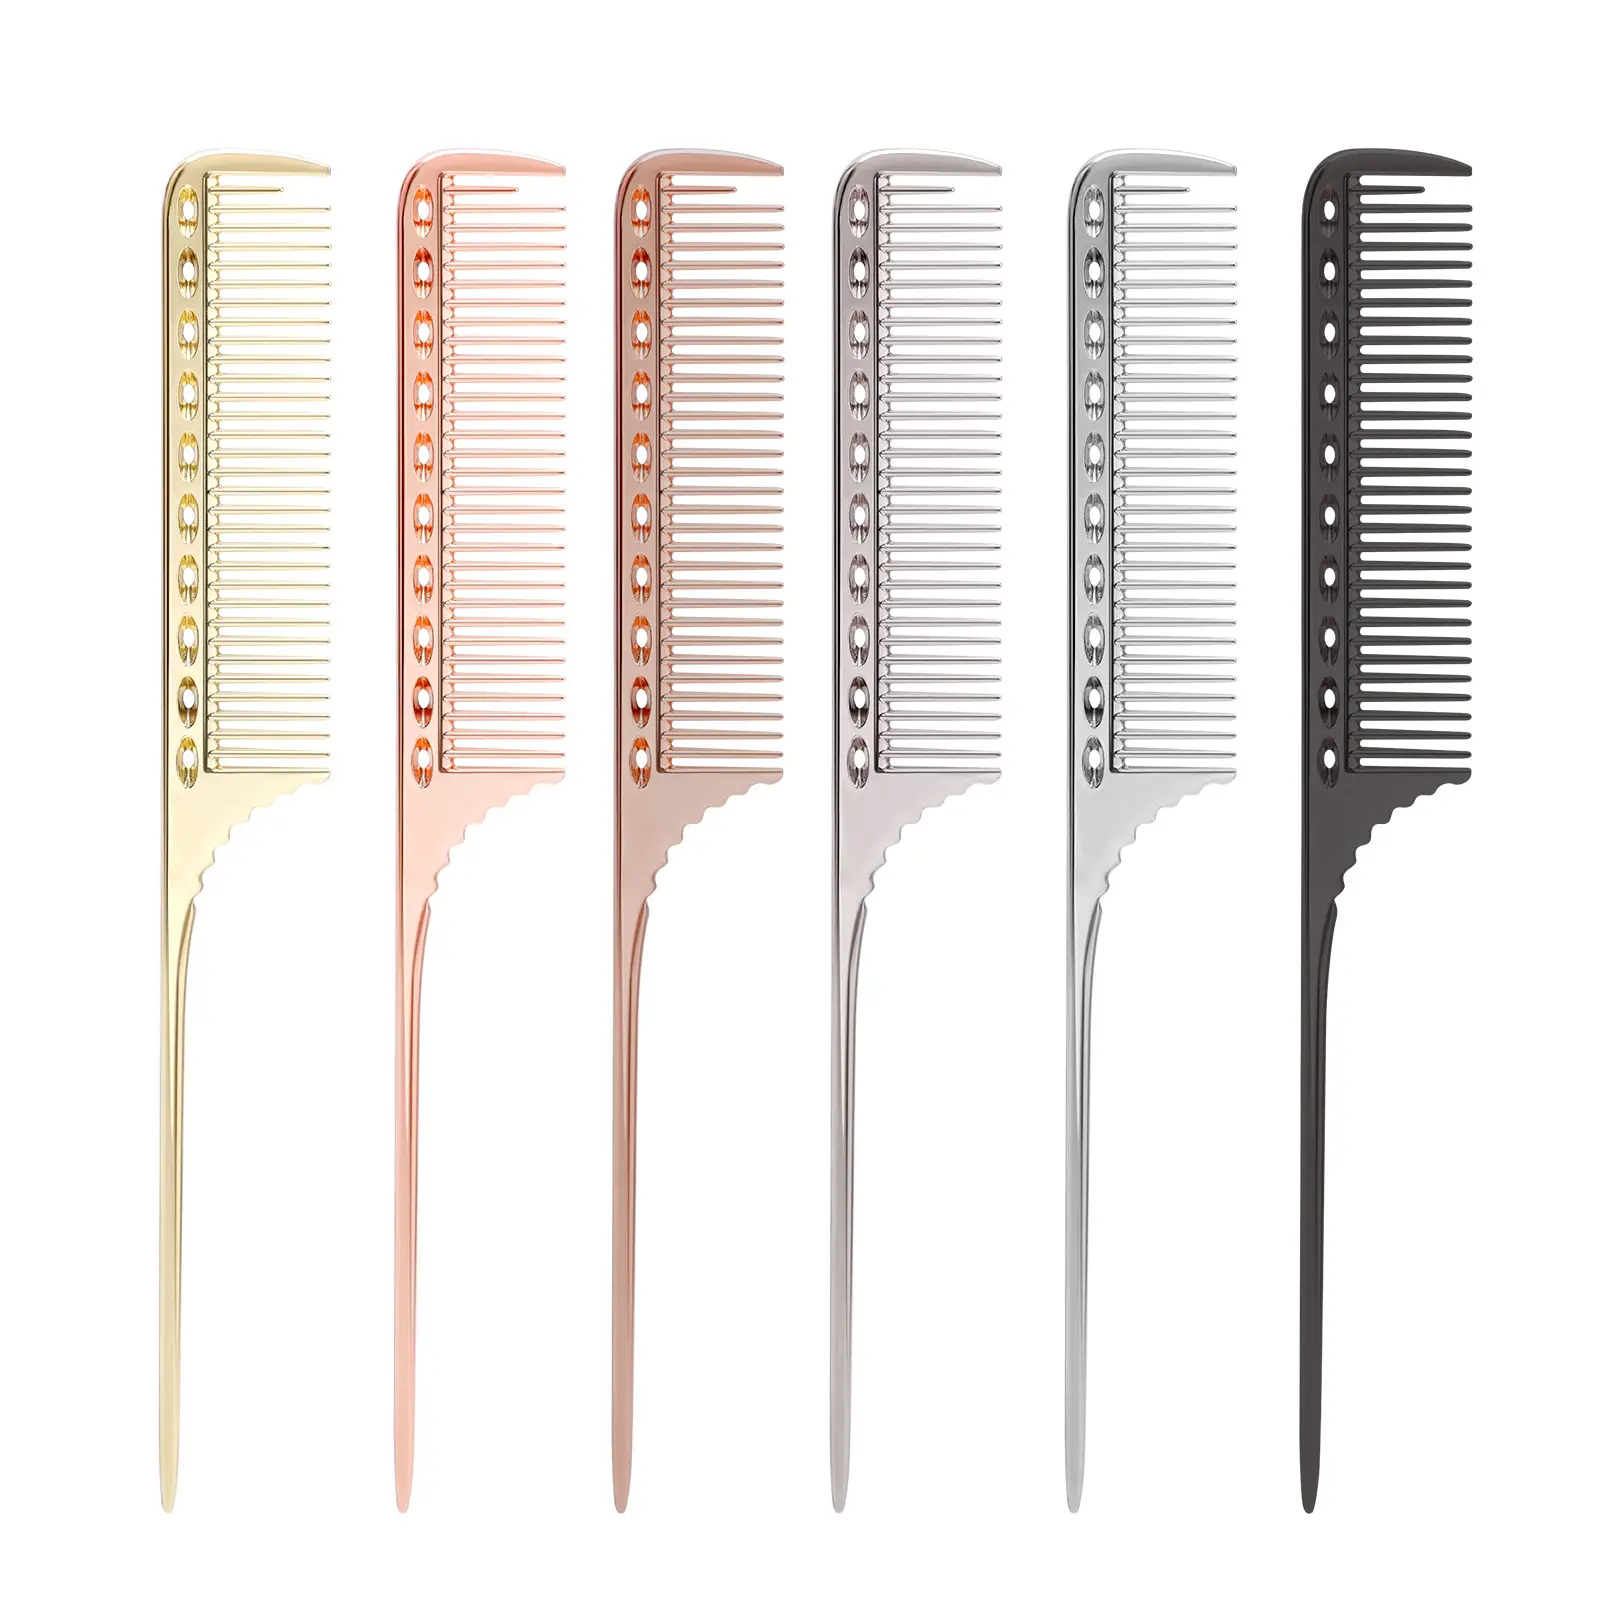 Metal Fine Tooth Hair Dyeing Comb Salon Tool Stainless Steel Hair Pick Comb Space Aluminum Hair Comb